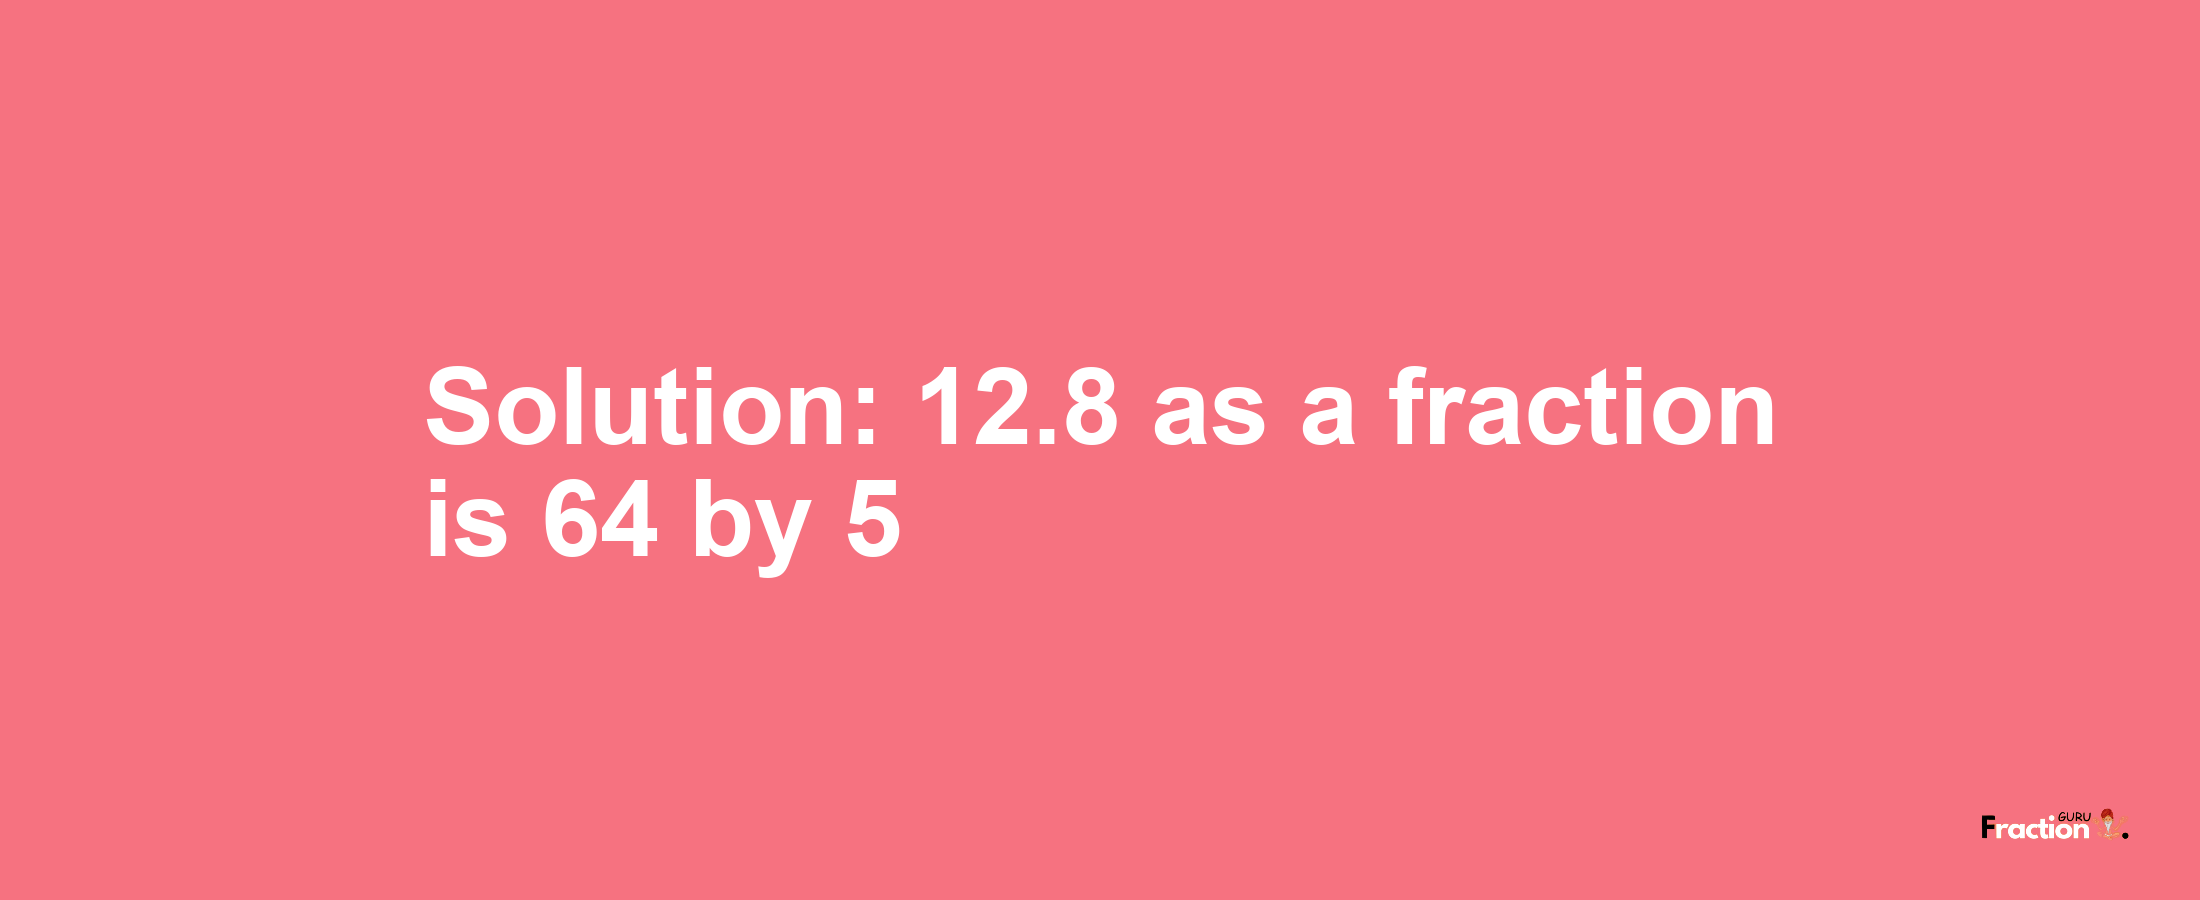 Solution:12.8 as a fraction is 64/5